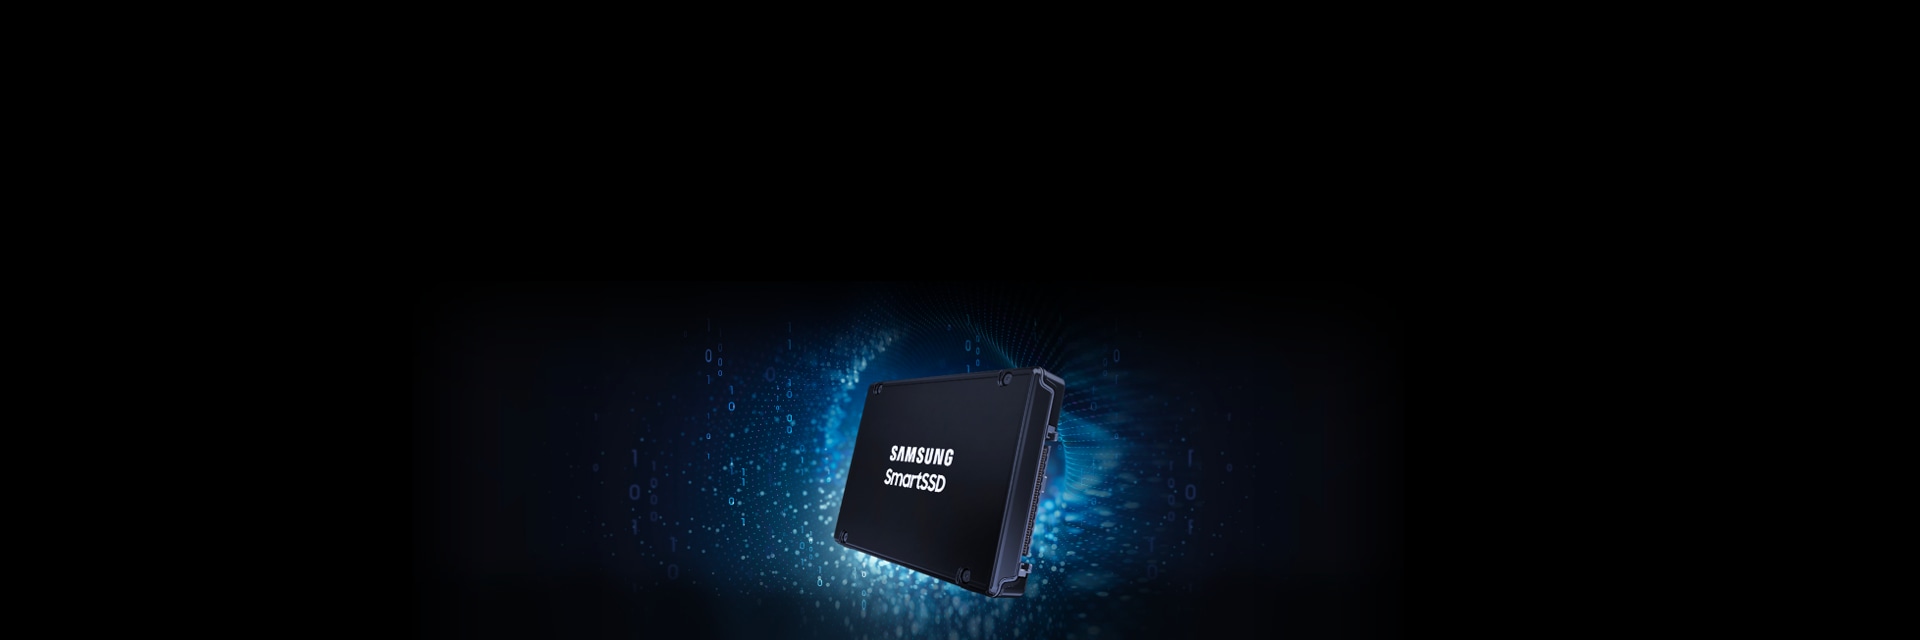  An image of which SmartSSD is placed against the backdrop of digital graphics consisting of binary data and neural networks.